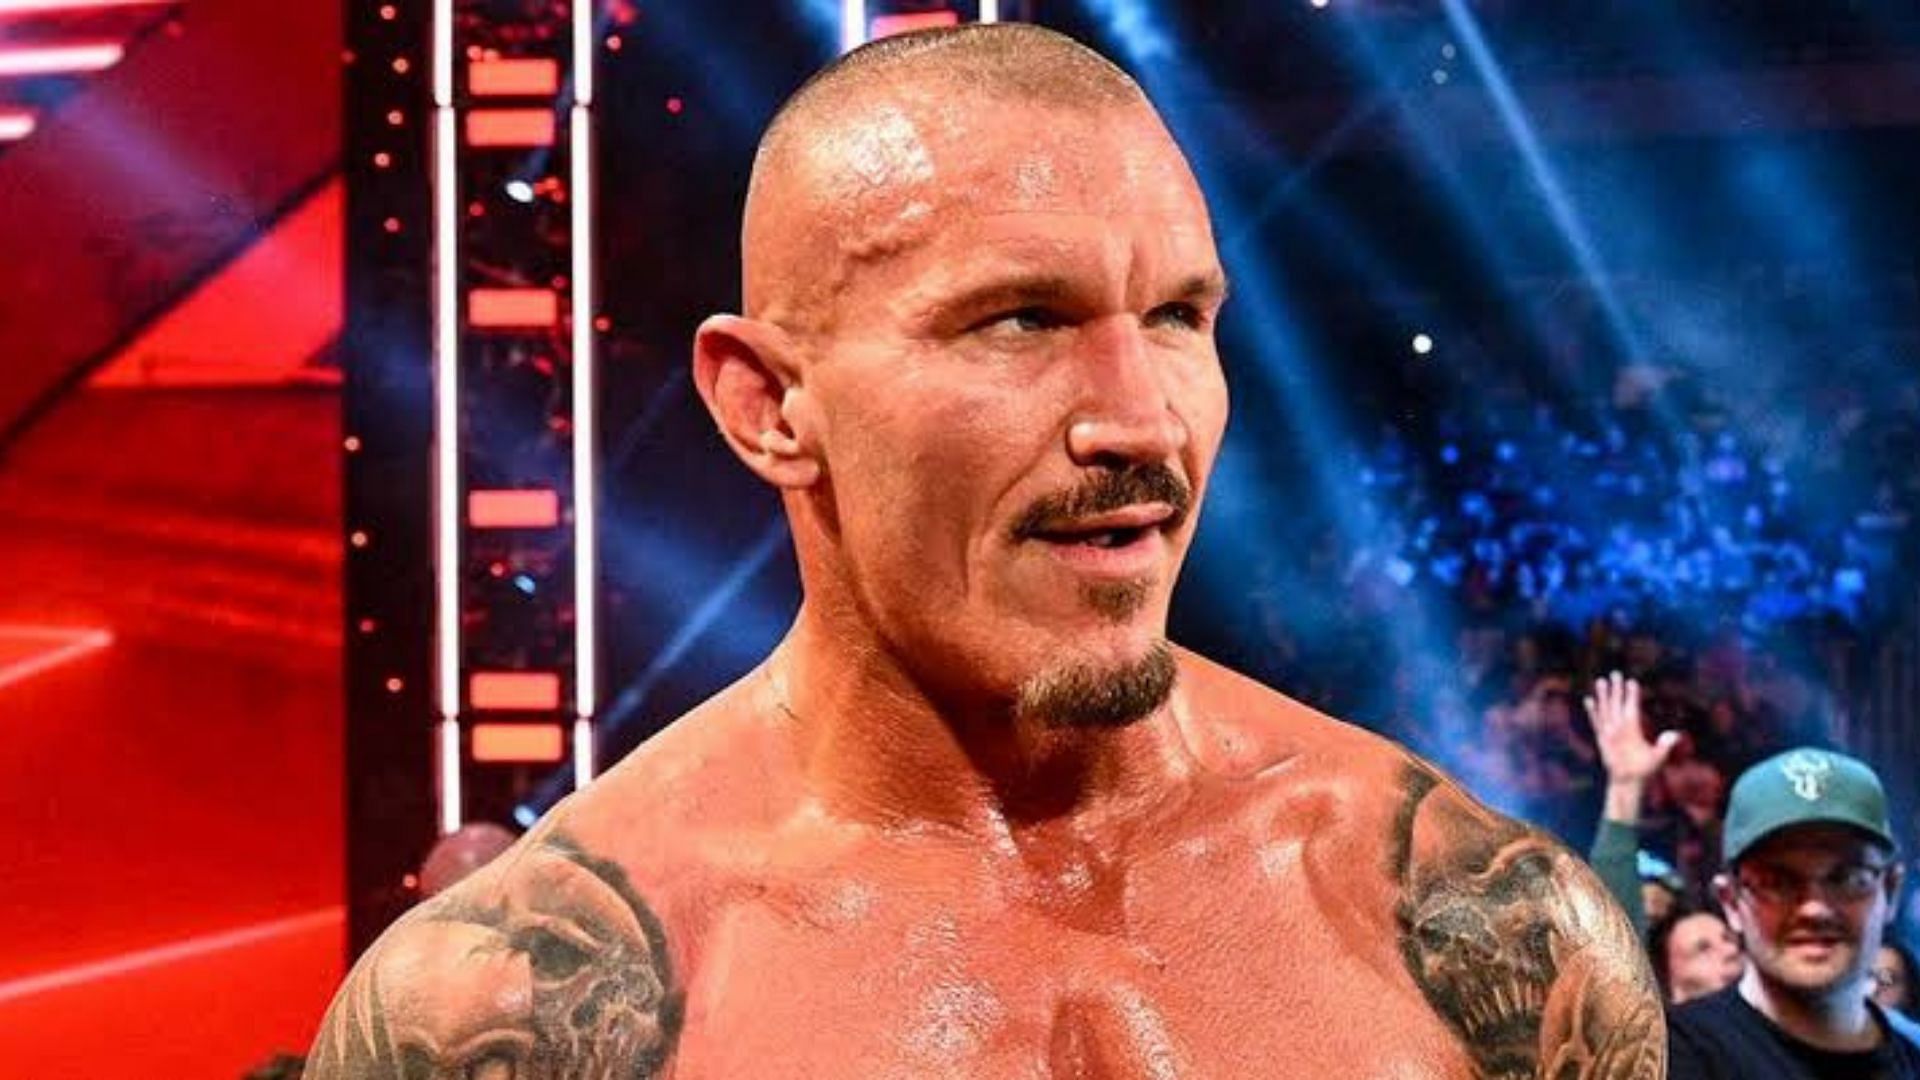 The Viper has engaged in an interesting social media back-and-forth with one of his former stablemates